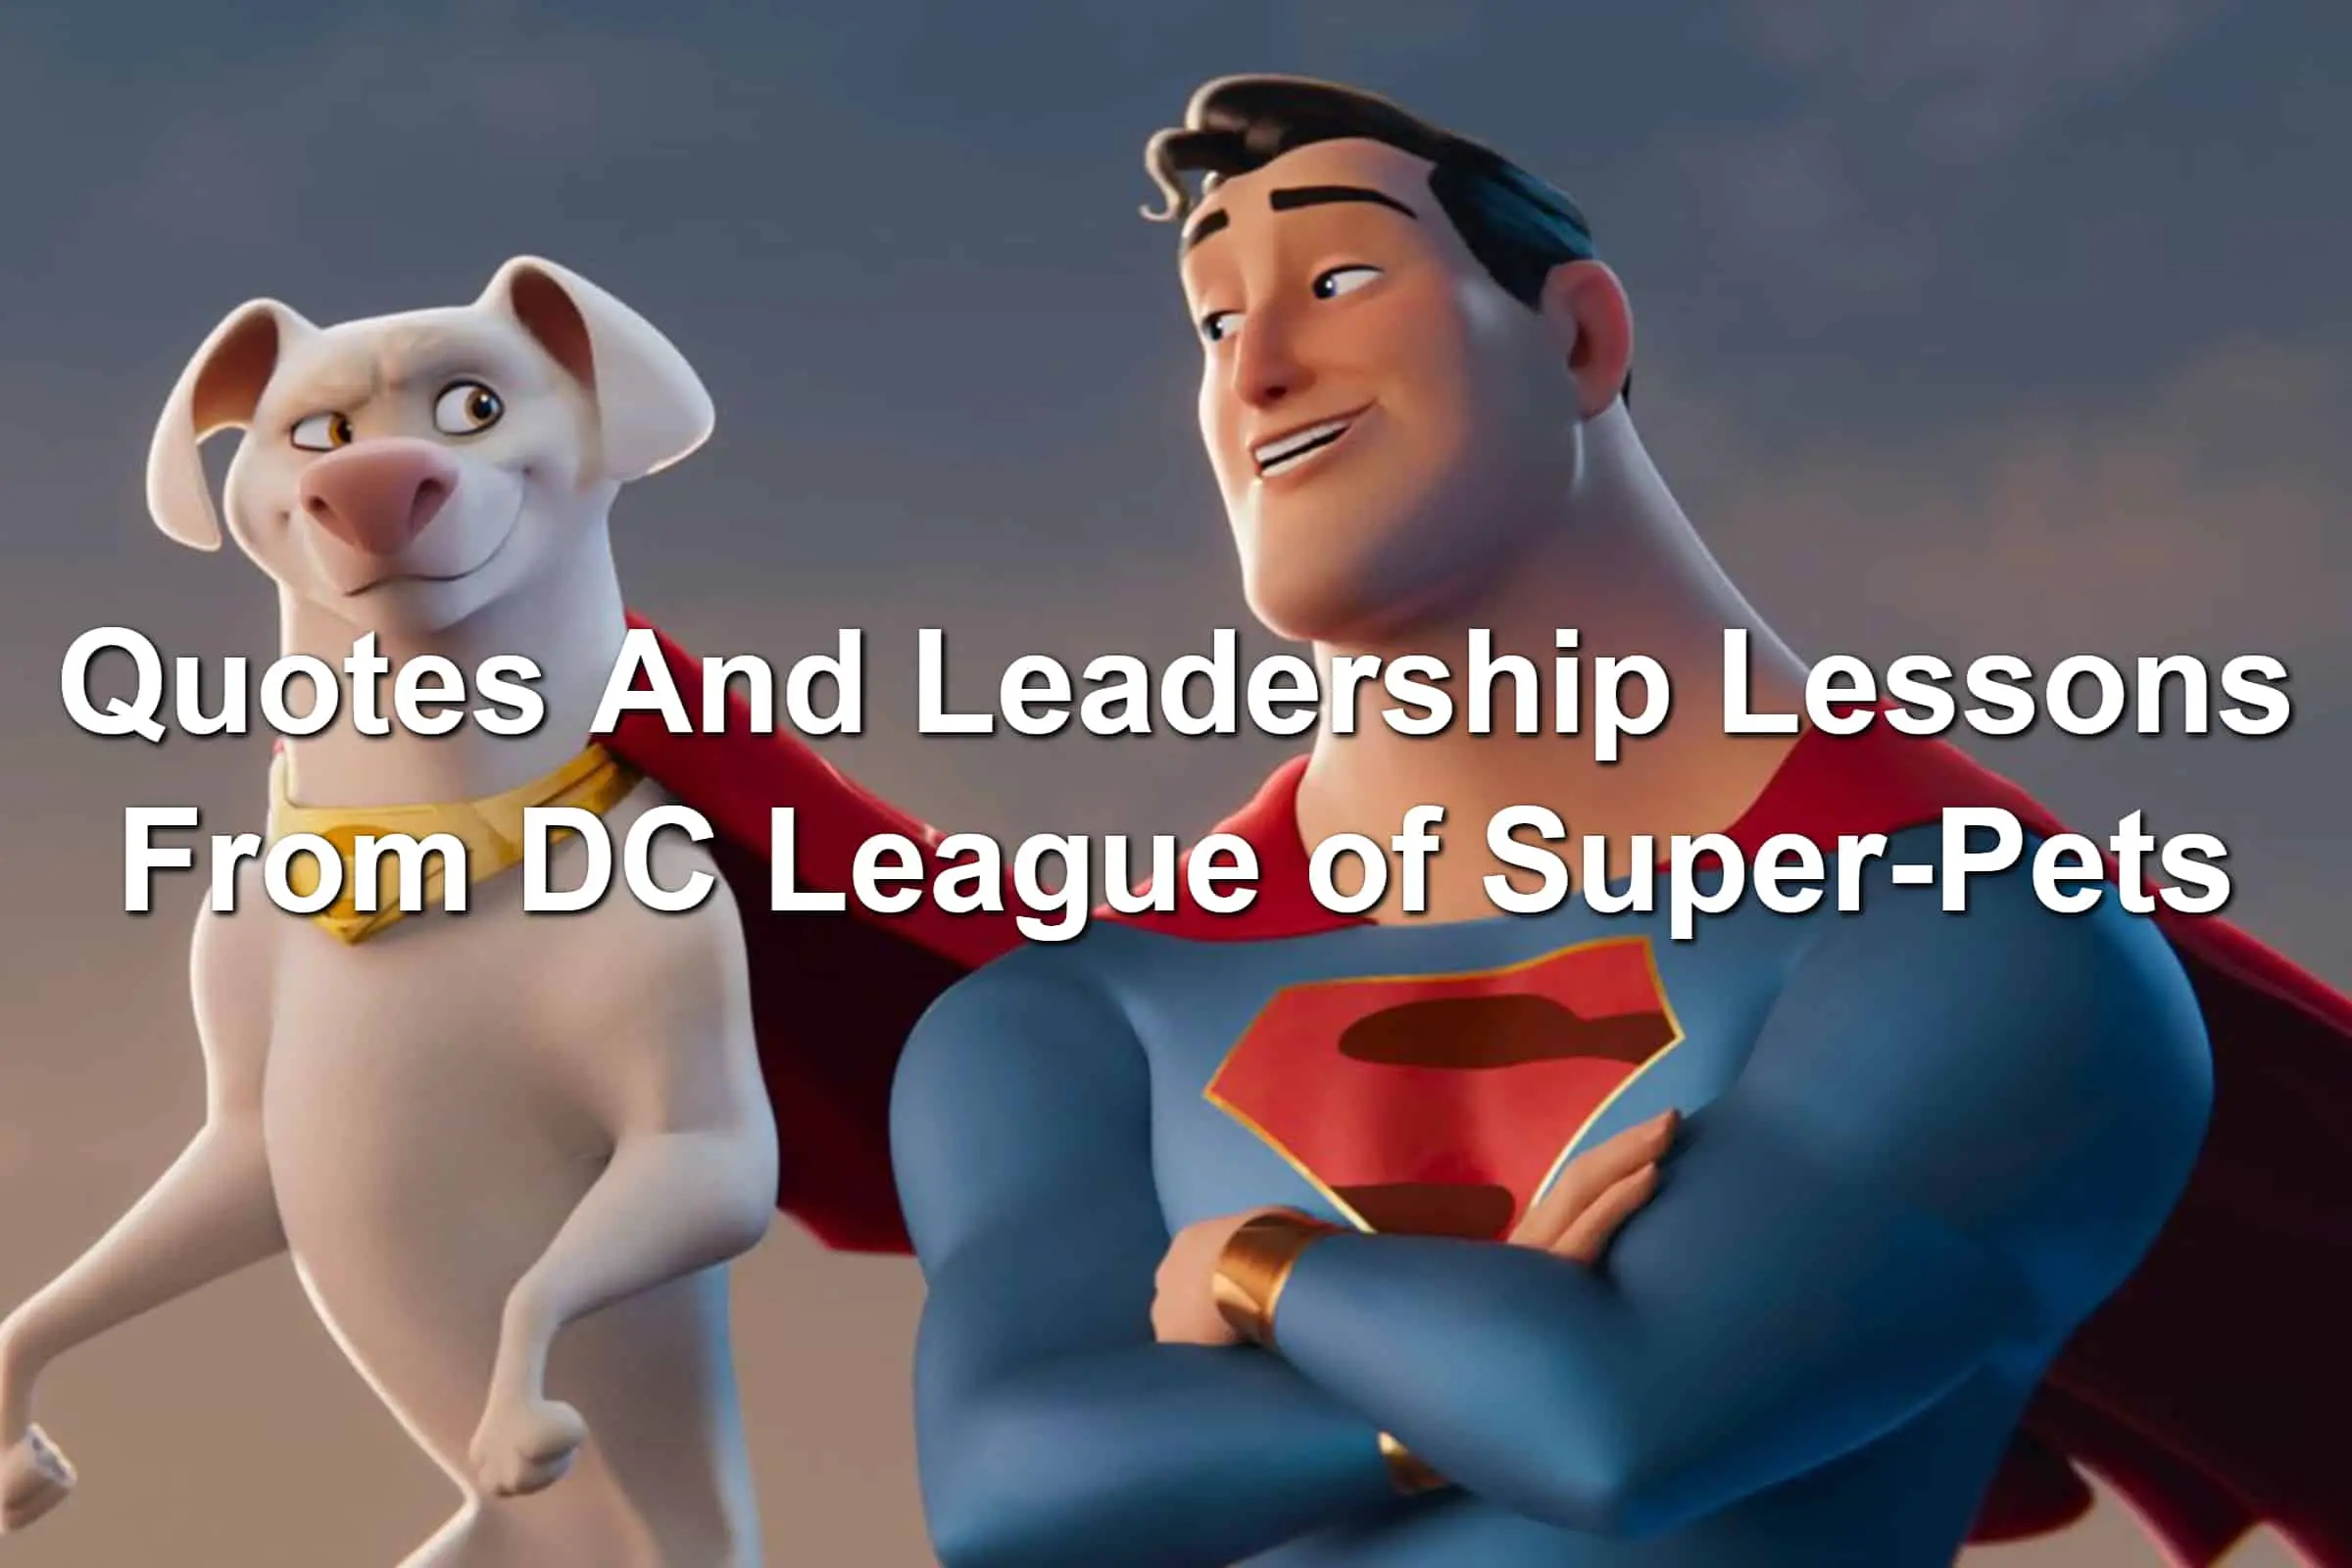 Krypto and Superman in DC League Of Super-Pets